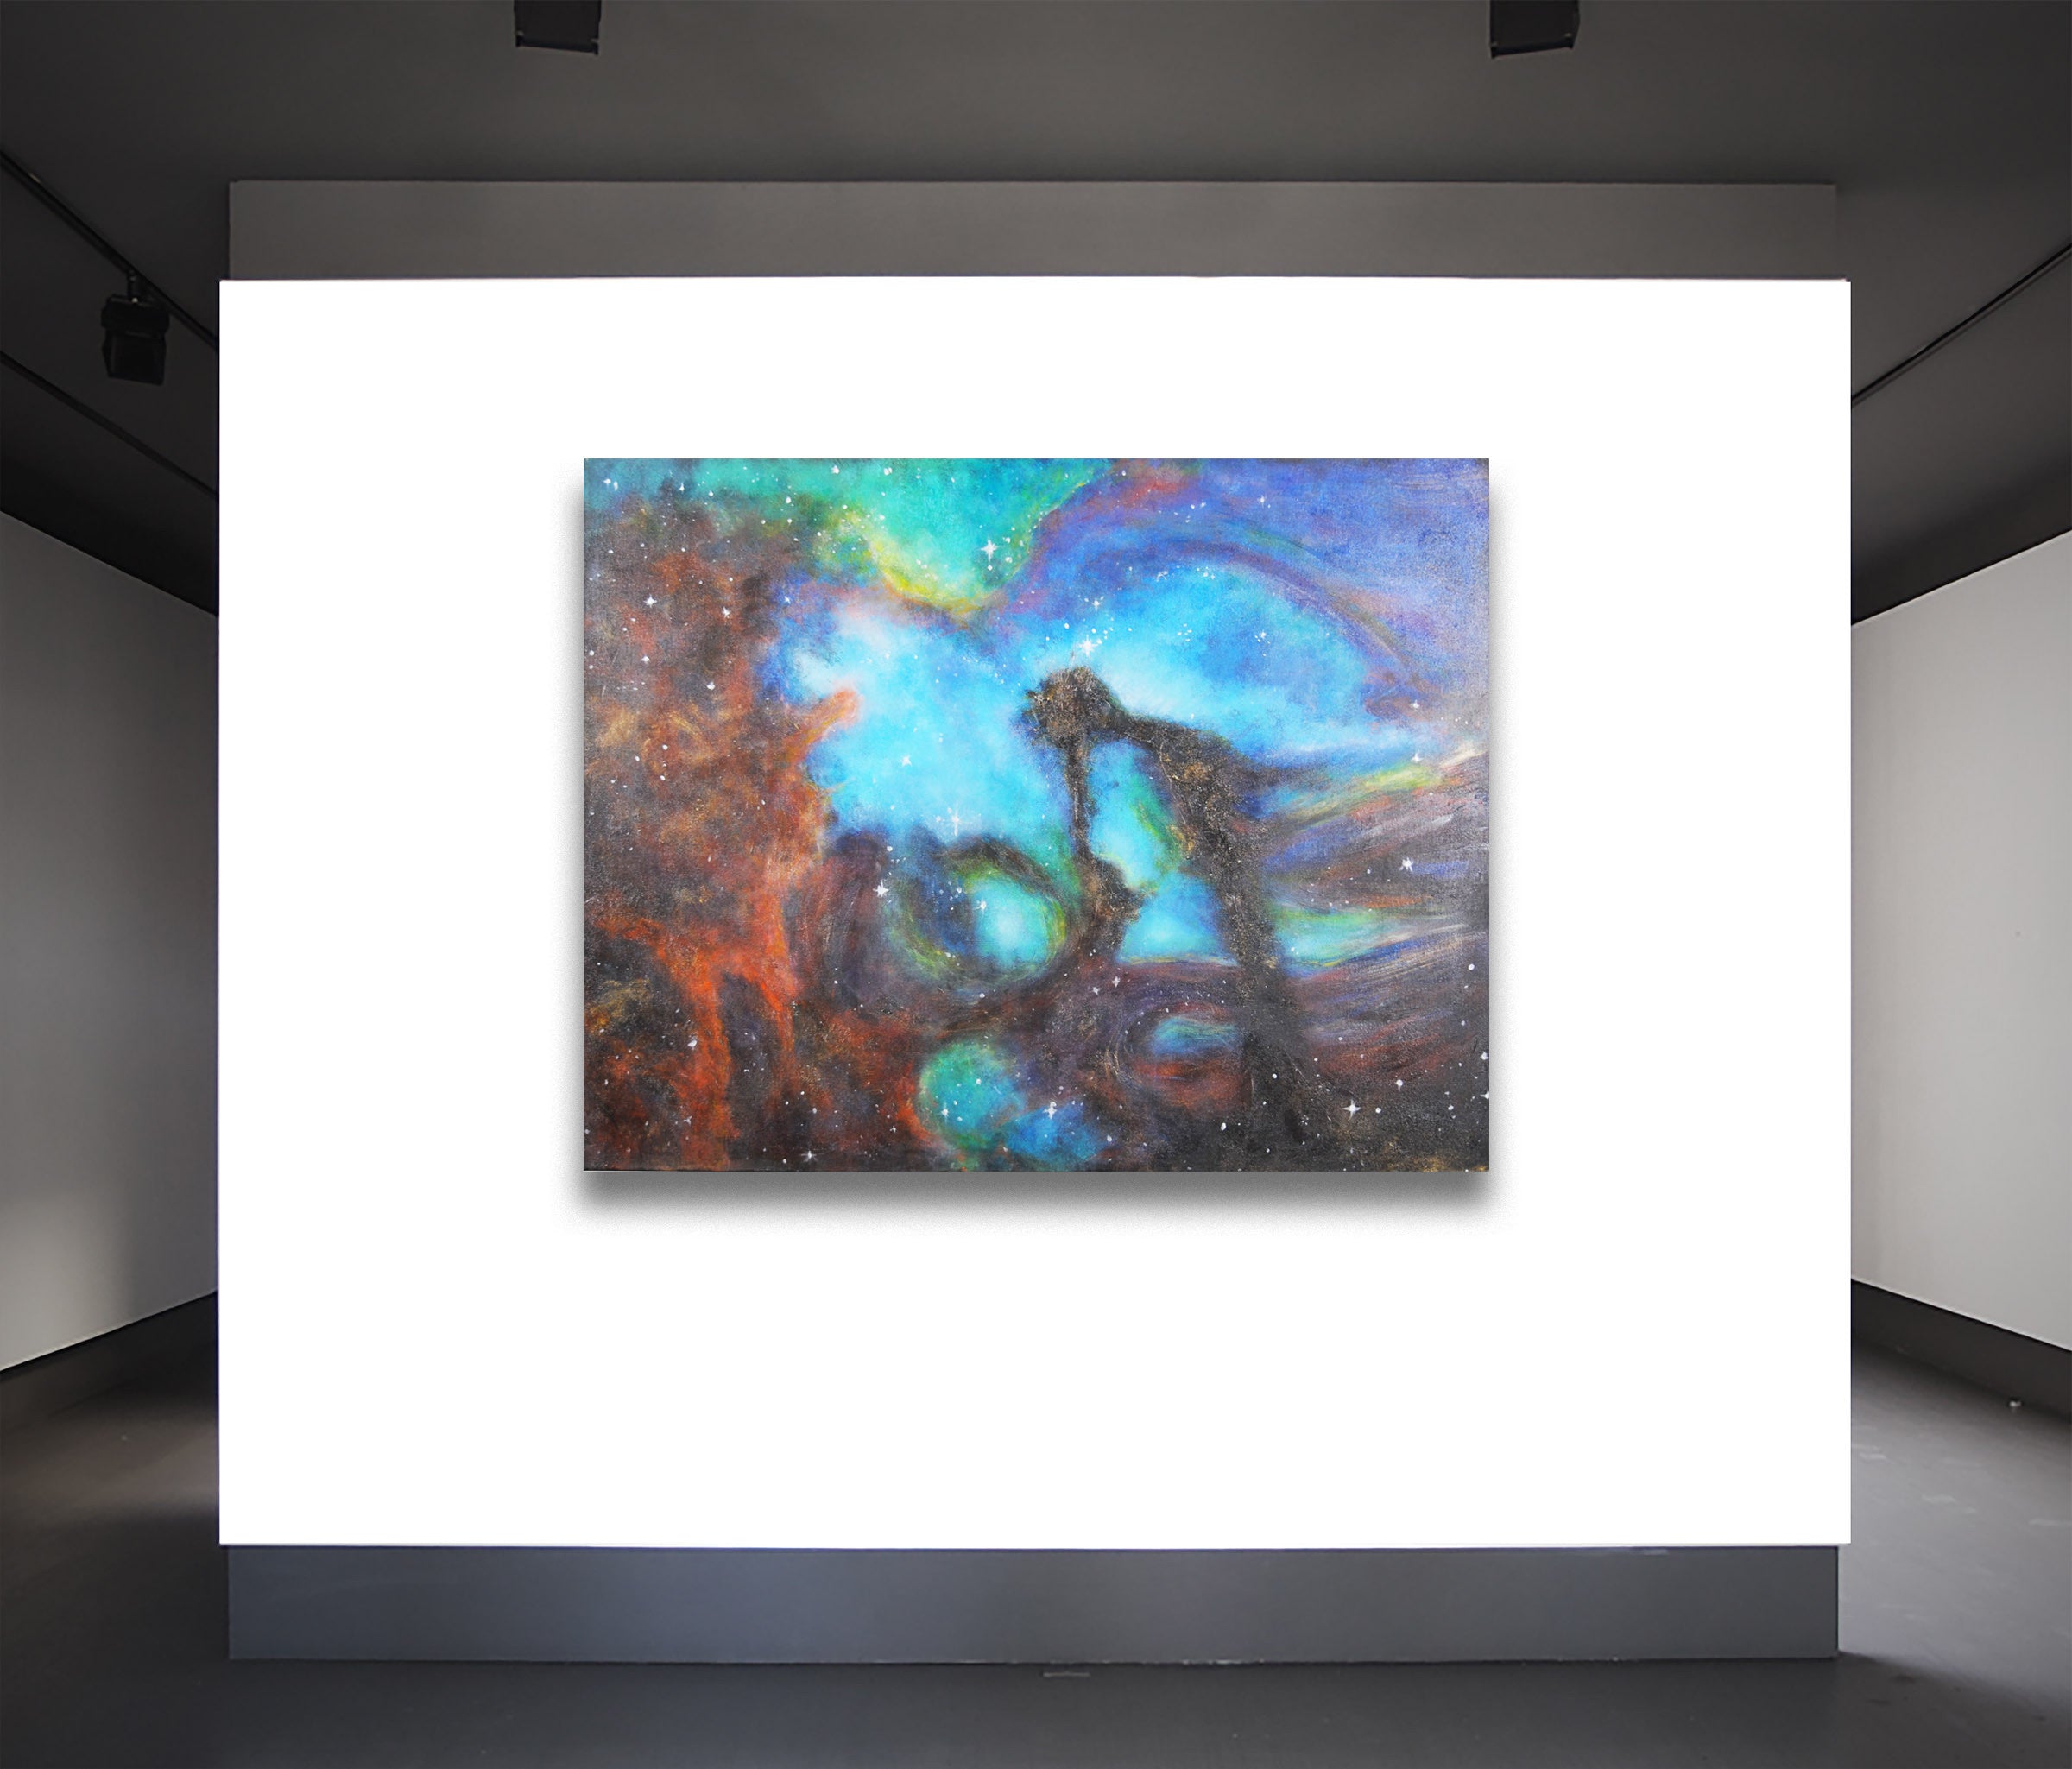 SMHD 53 "Drifting in Nebula" - SMHDGalleries